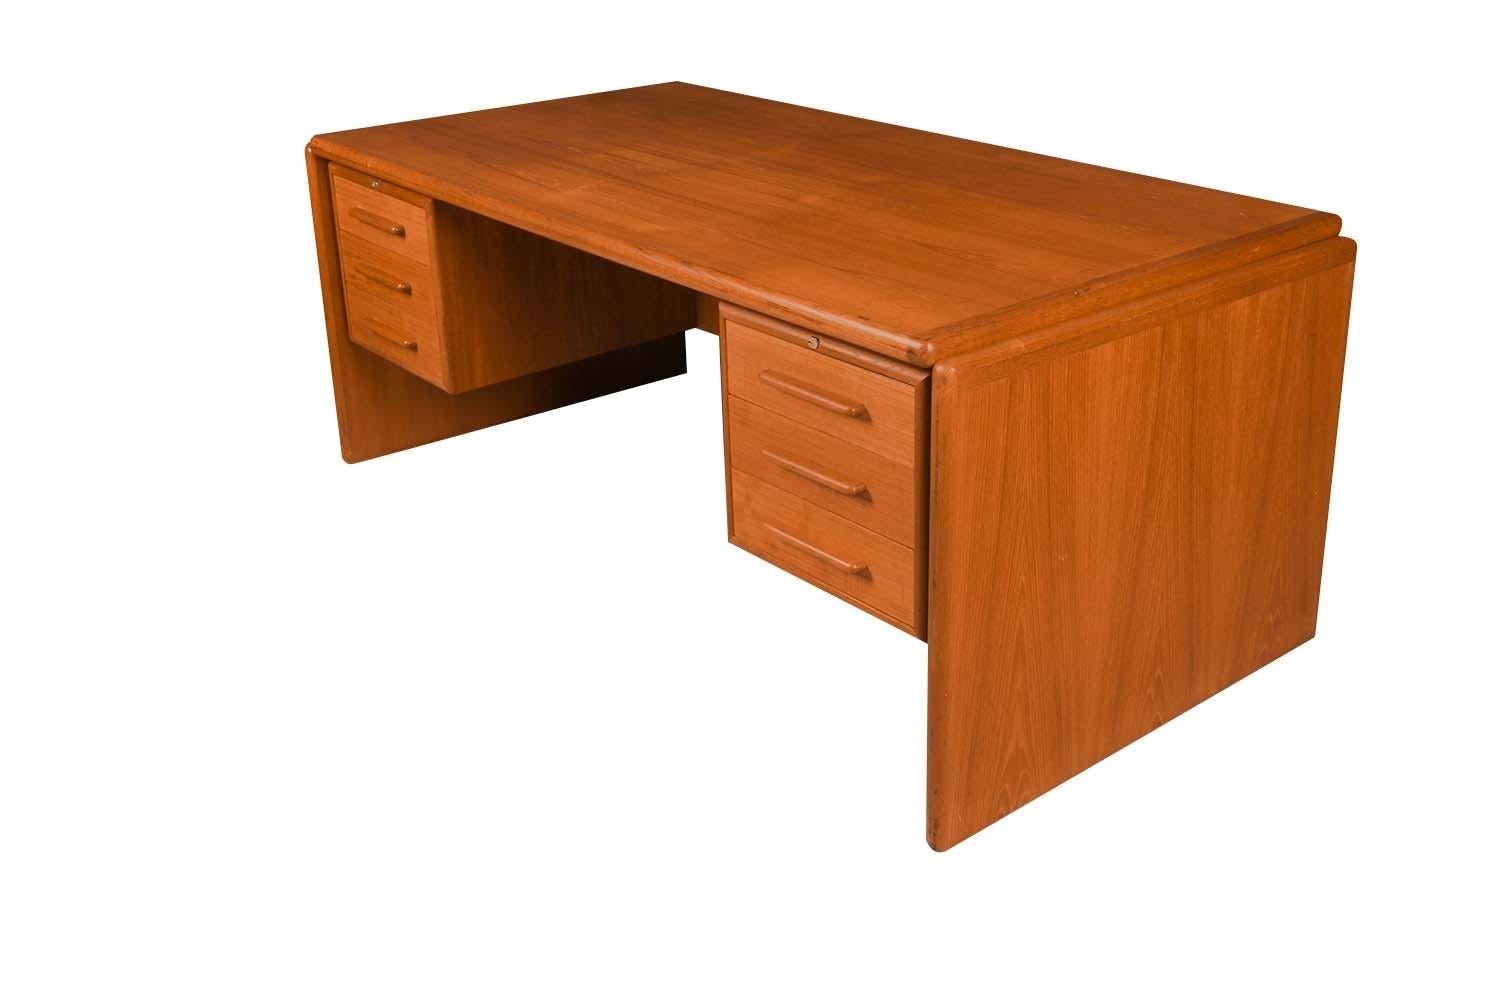 Large beautiful remarkable statement in design and craftsmanship. This large midcentury teak executive size desk, precisely crafted in exceptional teak grain wood, with a fully finished back the finished back side makes this desk ideal for placement